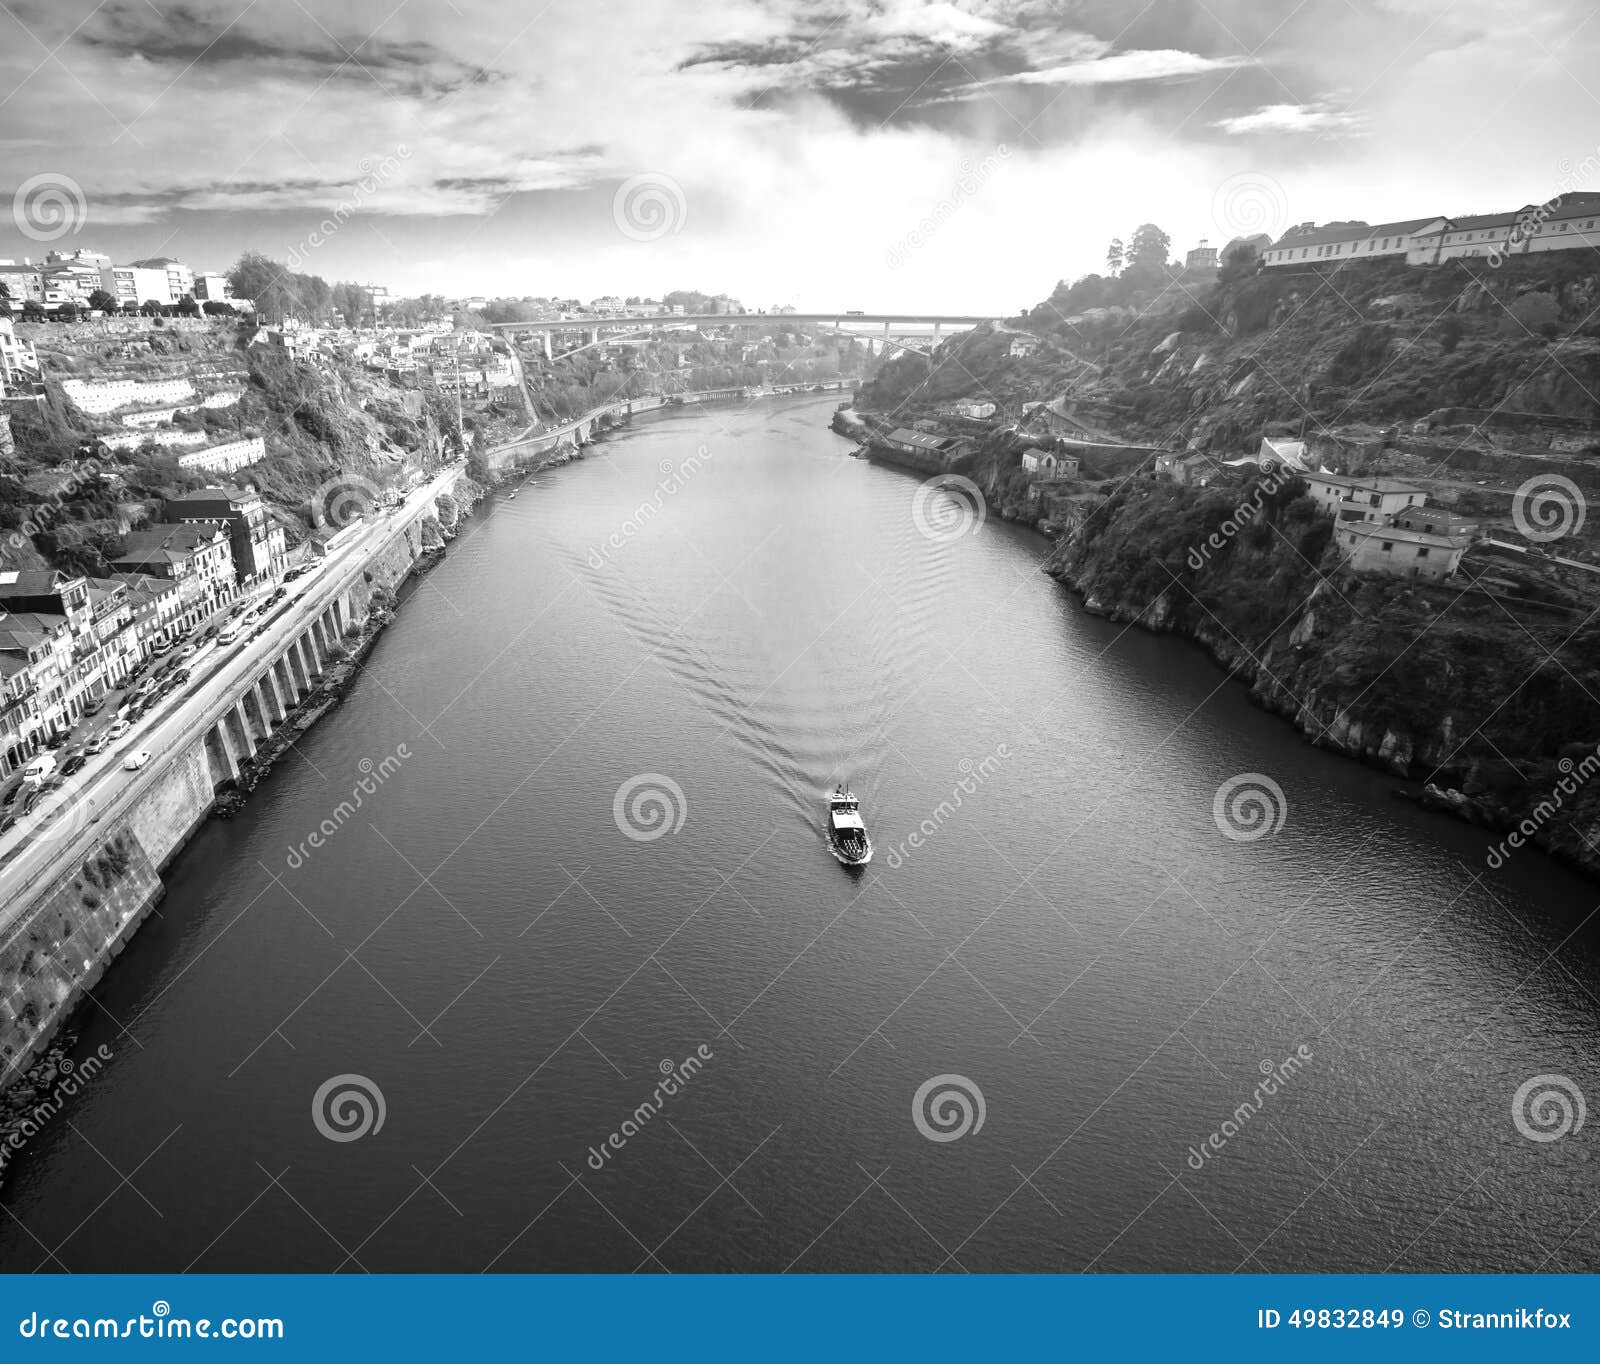 view of the river douro and waterfronts in the city of porto. sunny day. toned